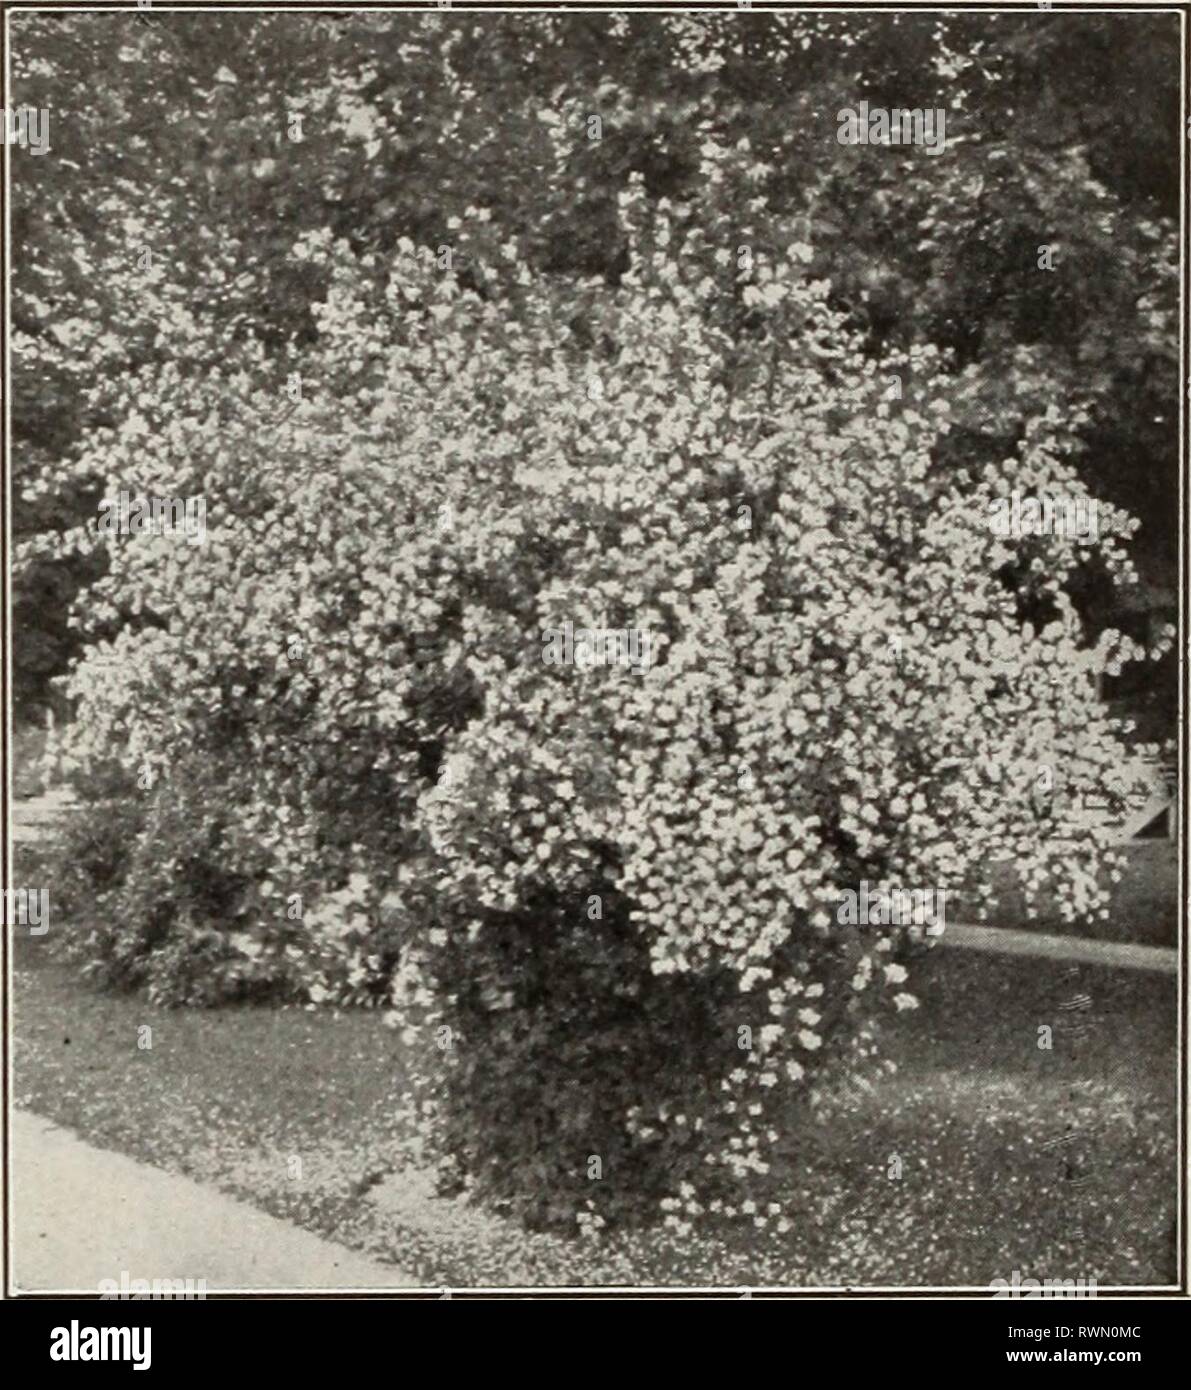 Ellwanger & Barry Mt Hope Ellwanger & Barry Mt Hope Nurseries ellwangerbarrymt1918moun Year: 1918  LIGUSTRUM-PRIVET—Confmued var. Regelianum. Kegel's Phivet. D. A val- uable hardy shrub with handsome, shining foli- age and horizontally spreading branches; desir- able when grown singly as a specimen, or in masses, or for hedges. A prostrate form of Ibota. 18 to 24 in., 35c each; 10 for $2.50; 100 for $20.00. L. ovalifolium. California Privet. D. A vig- orous, hardy variety, of fine habit and foliage; valuable for hedges. 2 to 3 ft., 35c each; 10 for $1.50; 100 for $5.00. See also Hedge Plants.  Stock Photo